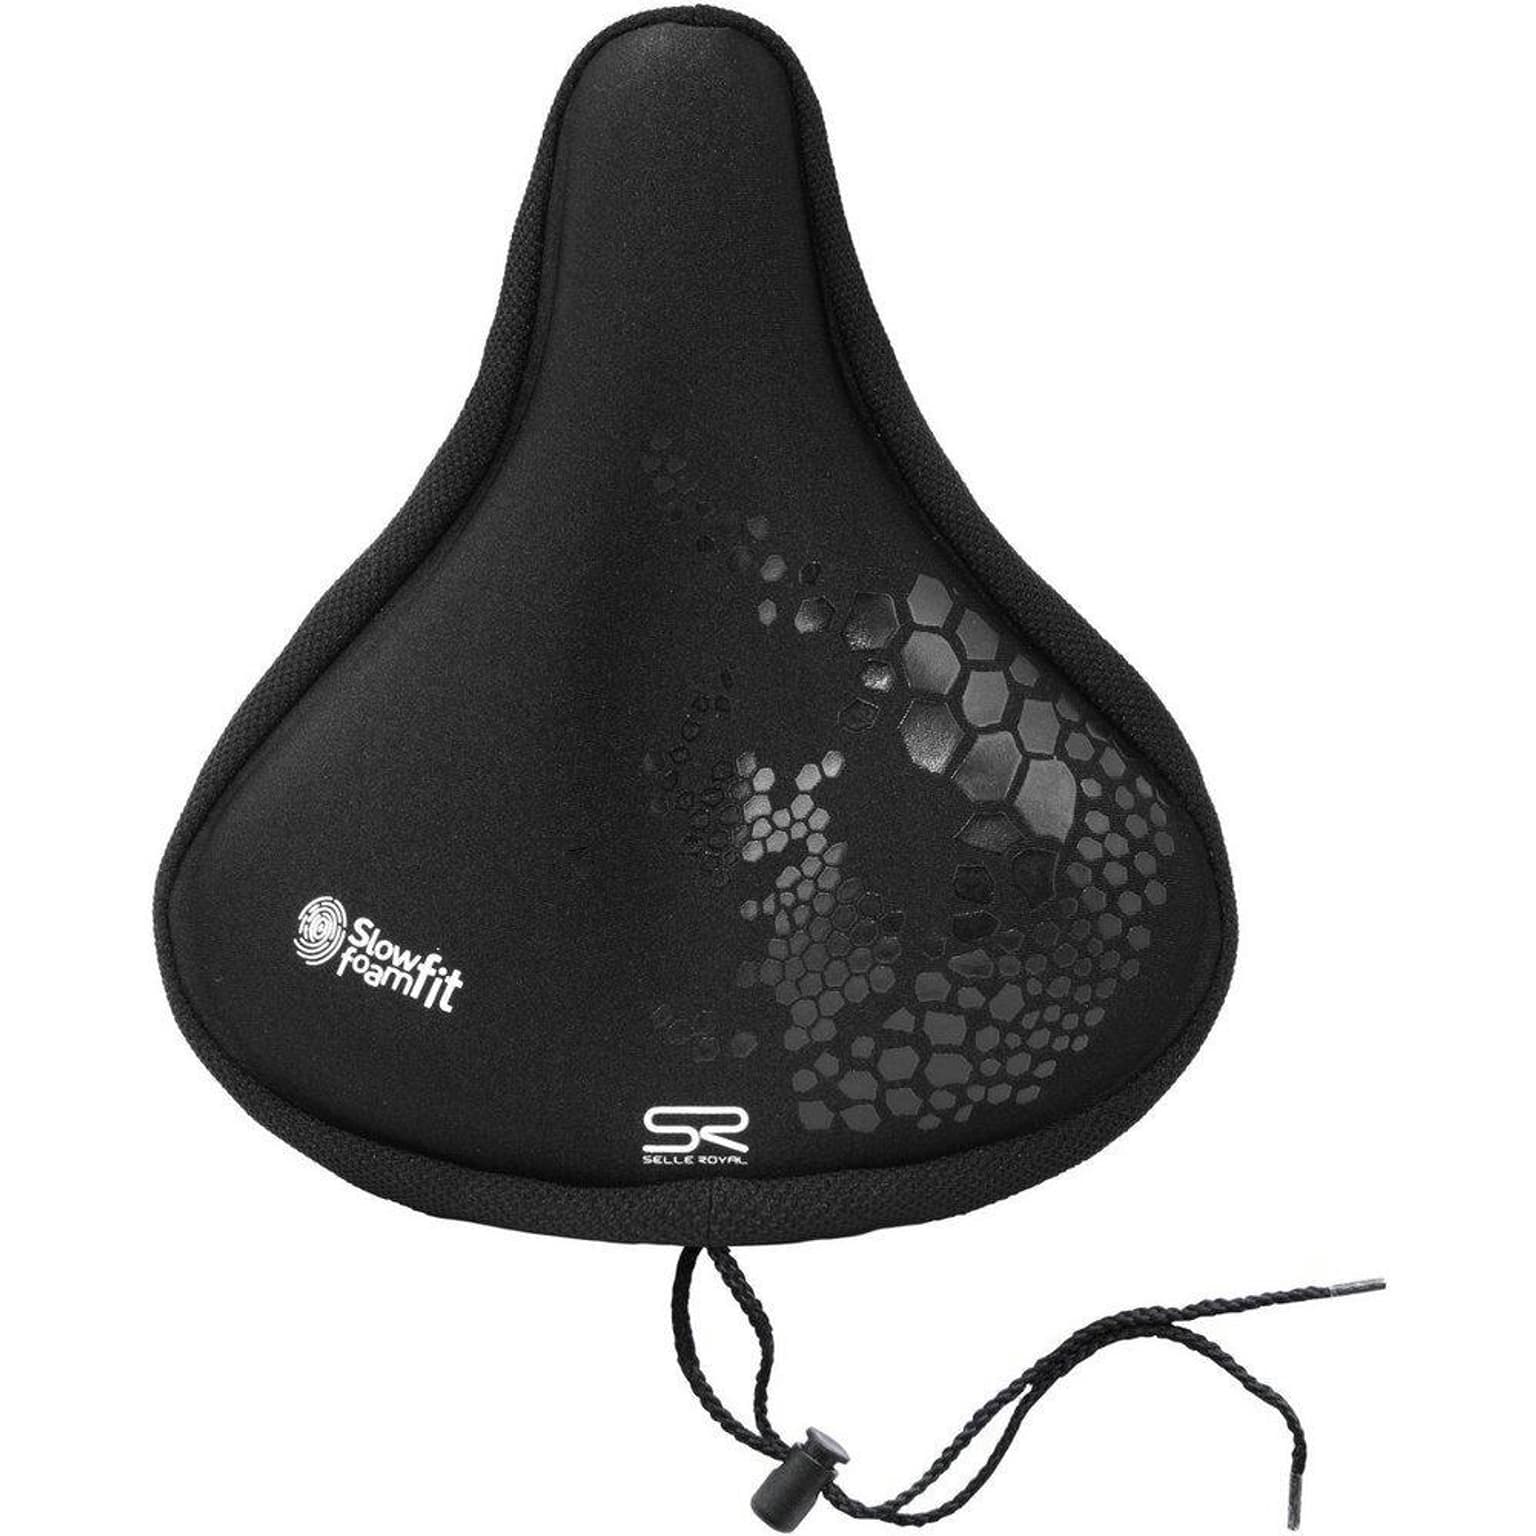 Selle Royal Selle Royal Slow Fit Foam Seat Cover Coprisella nero 1